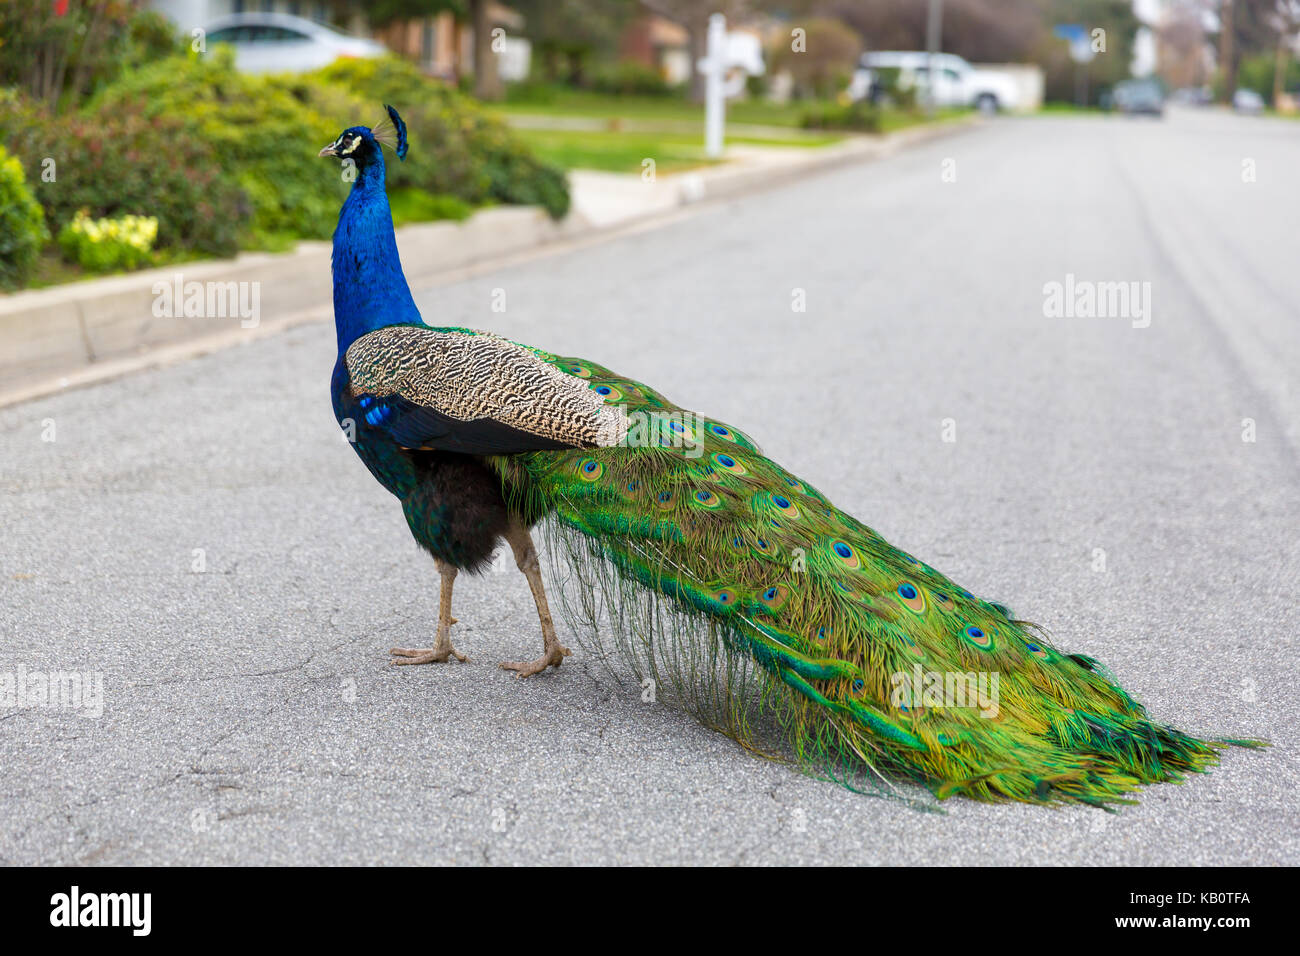 Peacock crossing the road Stock Photo